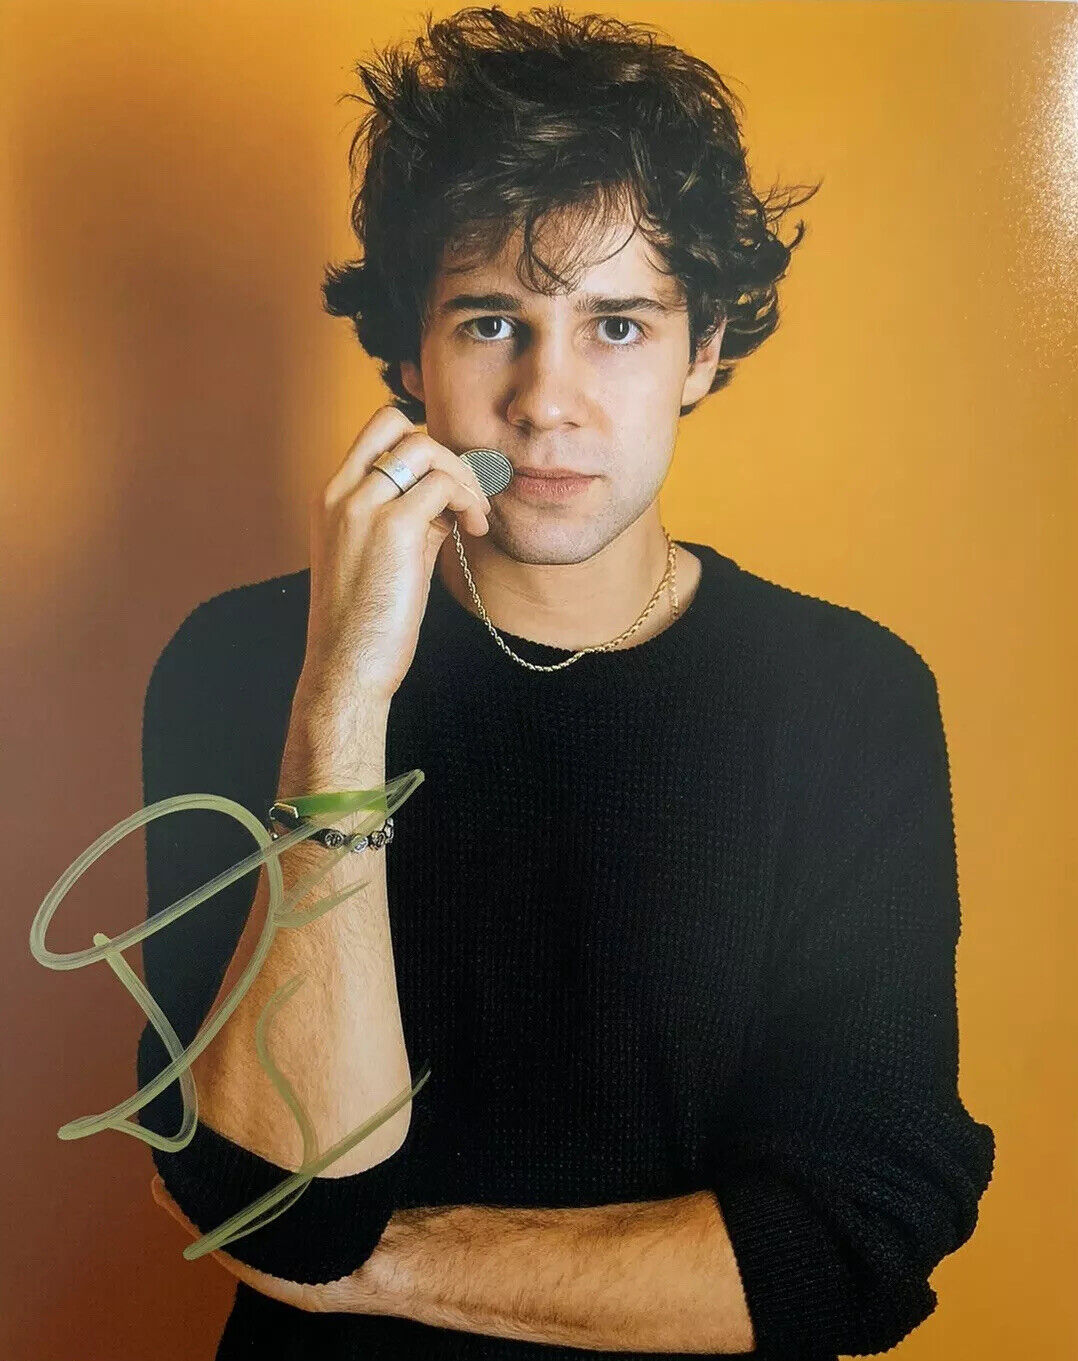 DAVID DOBRIK HAND SIGNED 8x10 Photo Poster painting YOUTUBER VLOGGER AUTOGRAPHED RARE AUTHENTIC